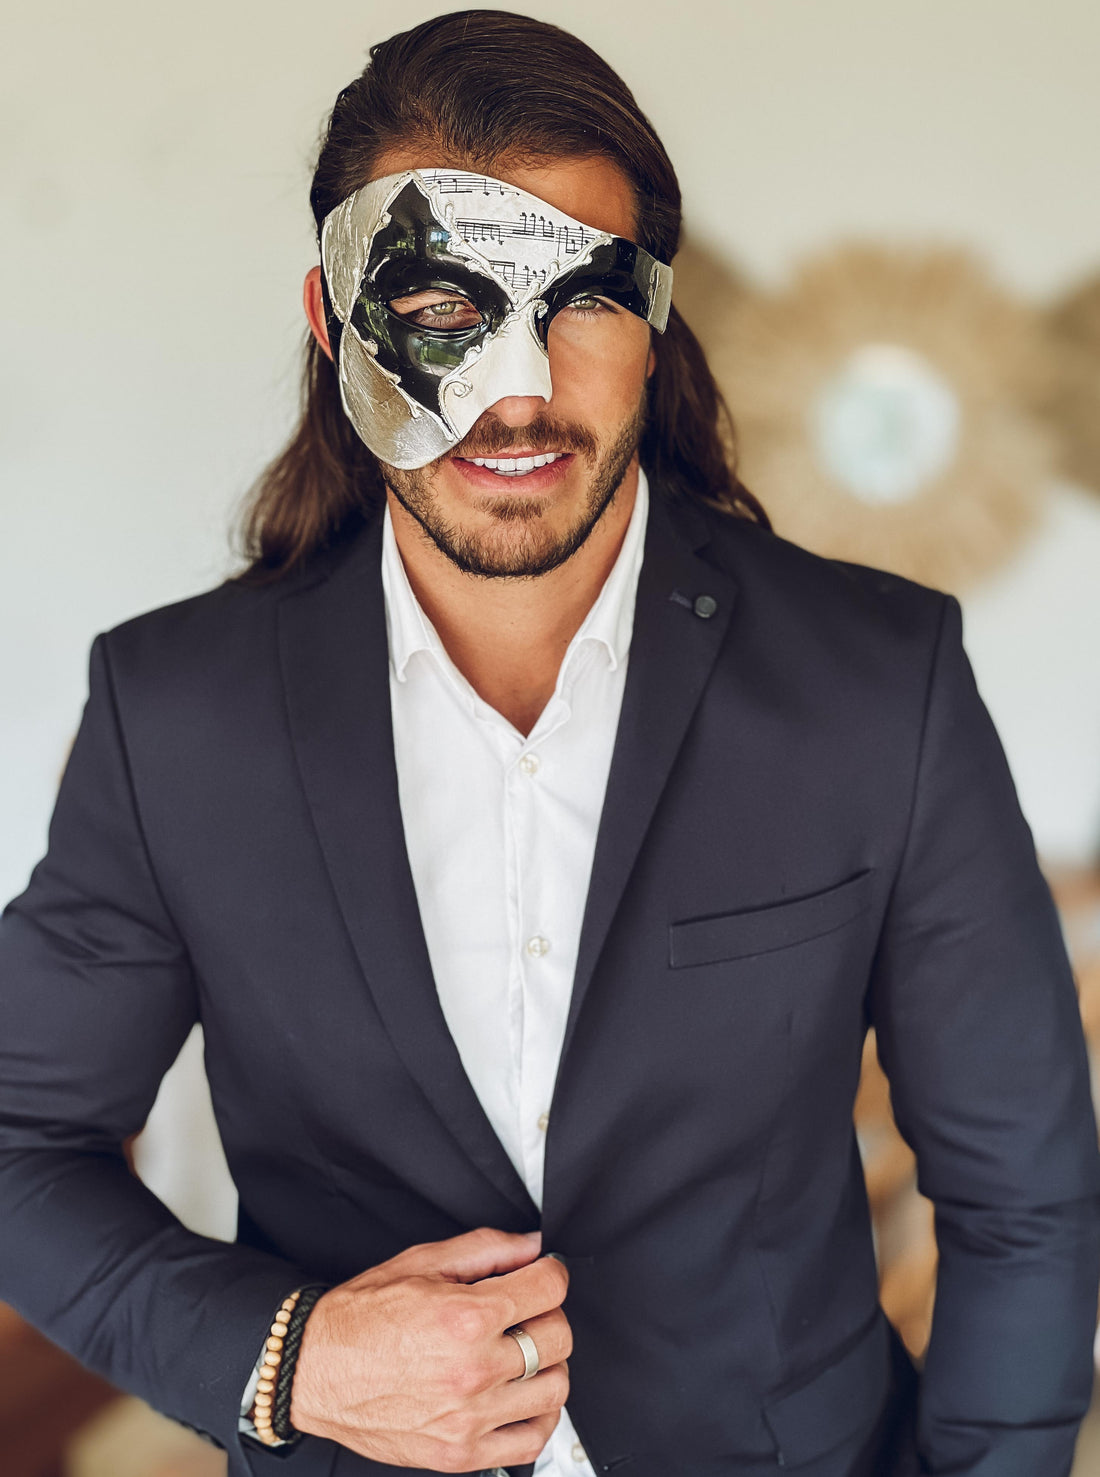 Phantom of The Opera Reimagined: The Black and Silver Mask with Musical Notes